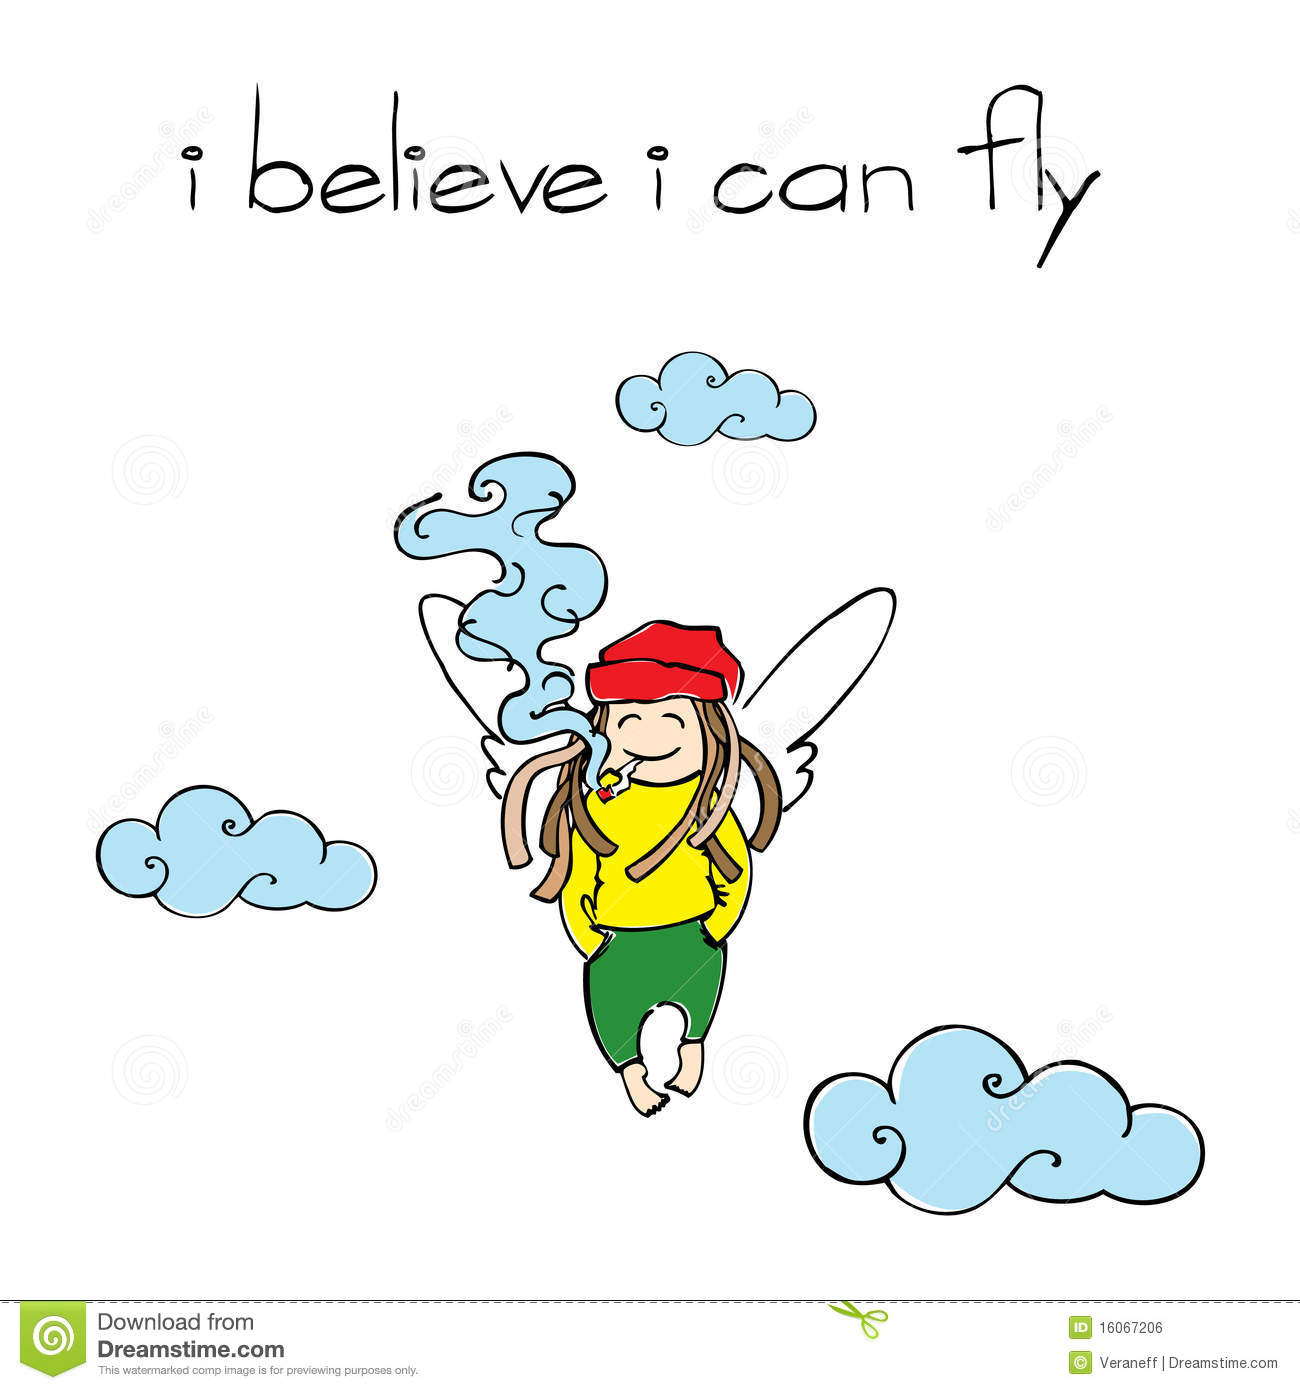 i can fly mp3